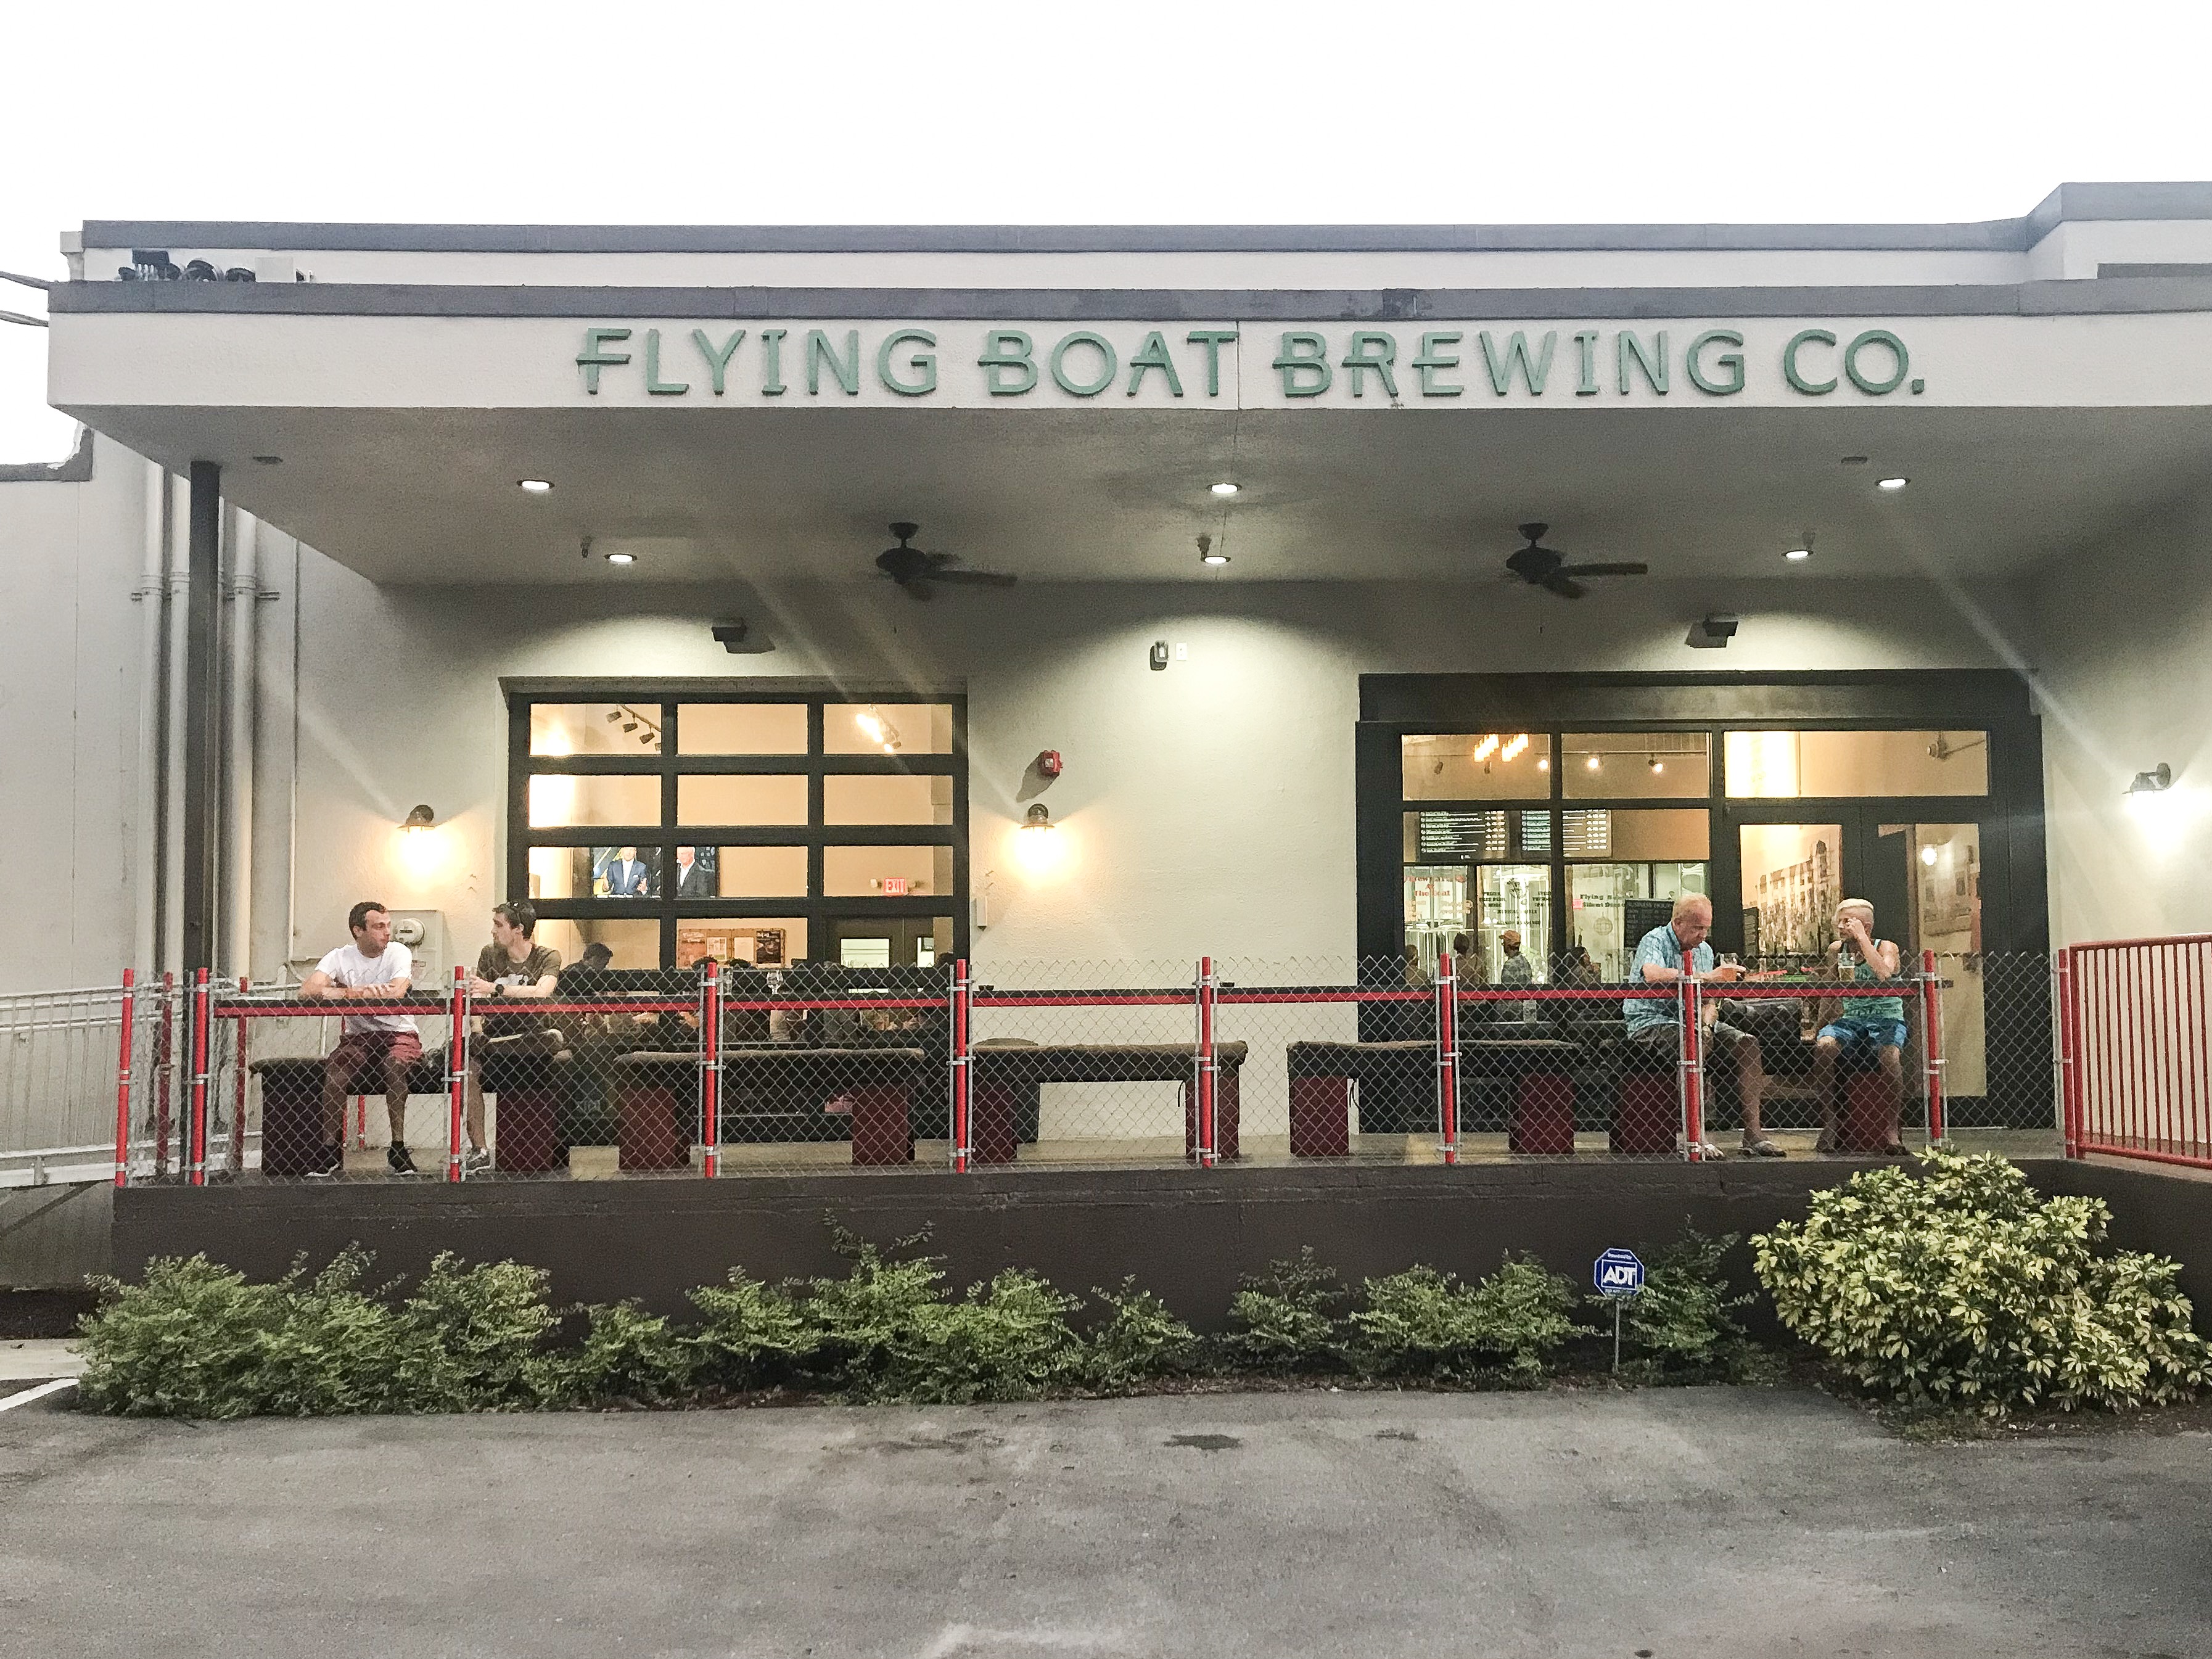 The front of Flying Boat Brewing